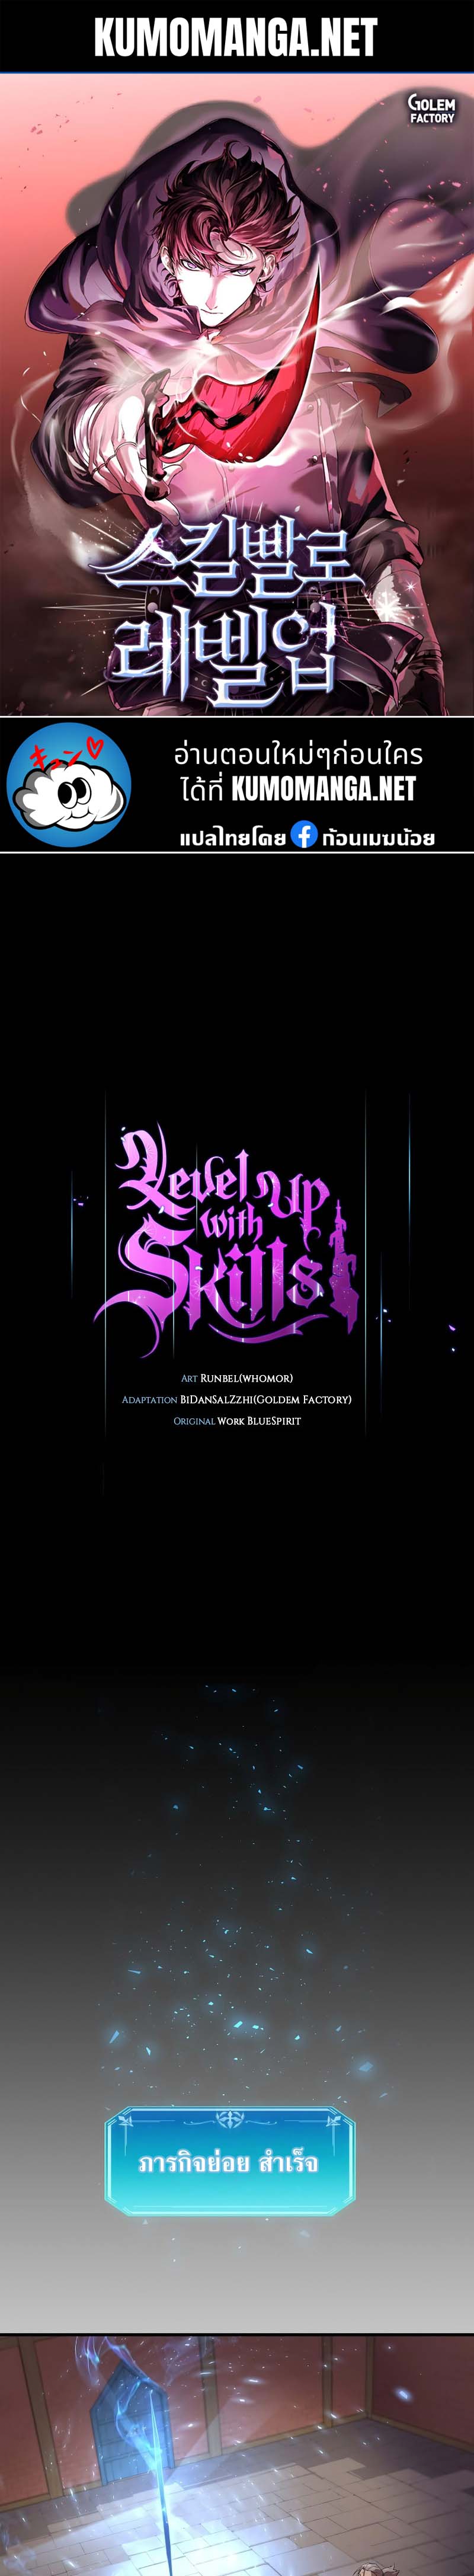 Level Up with Skills 60 (1) 001